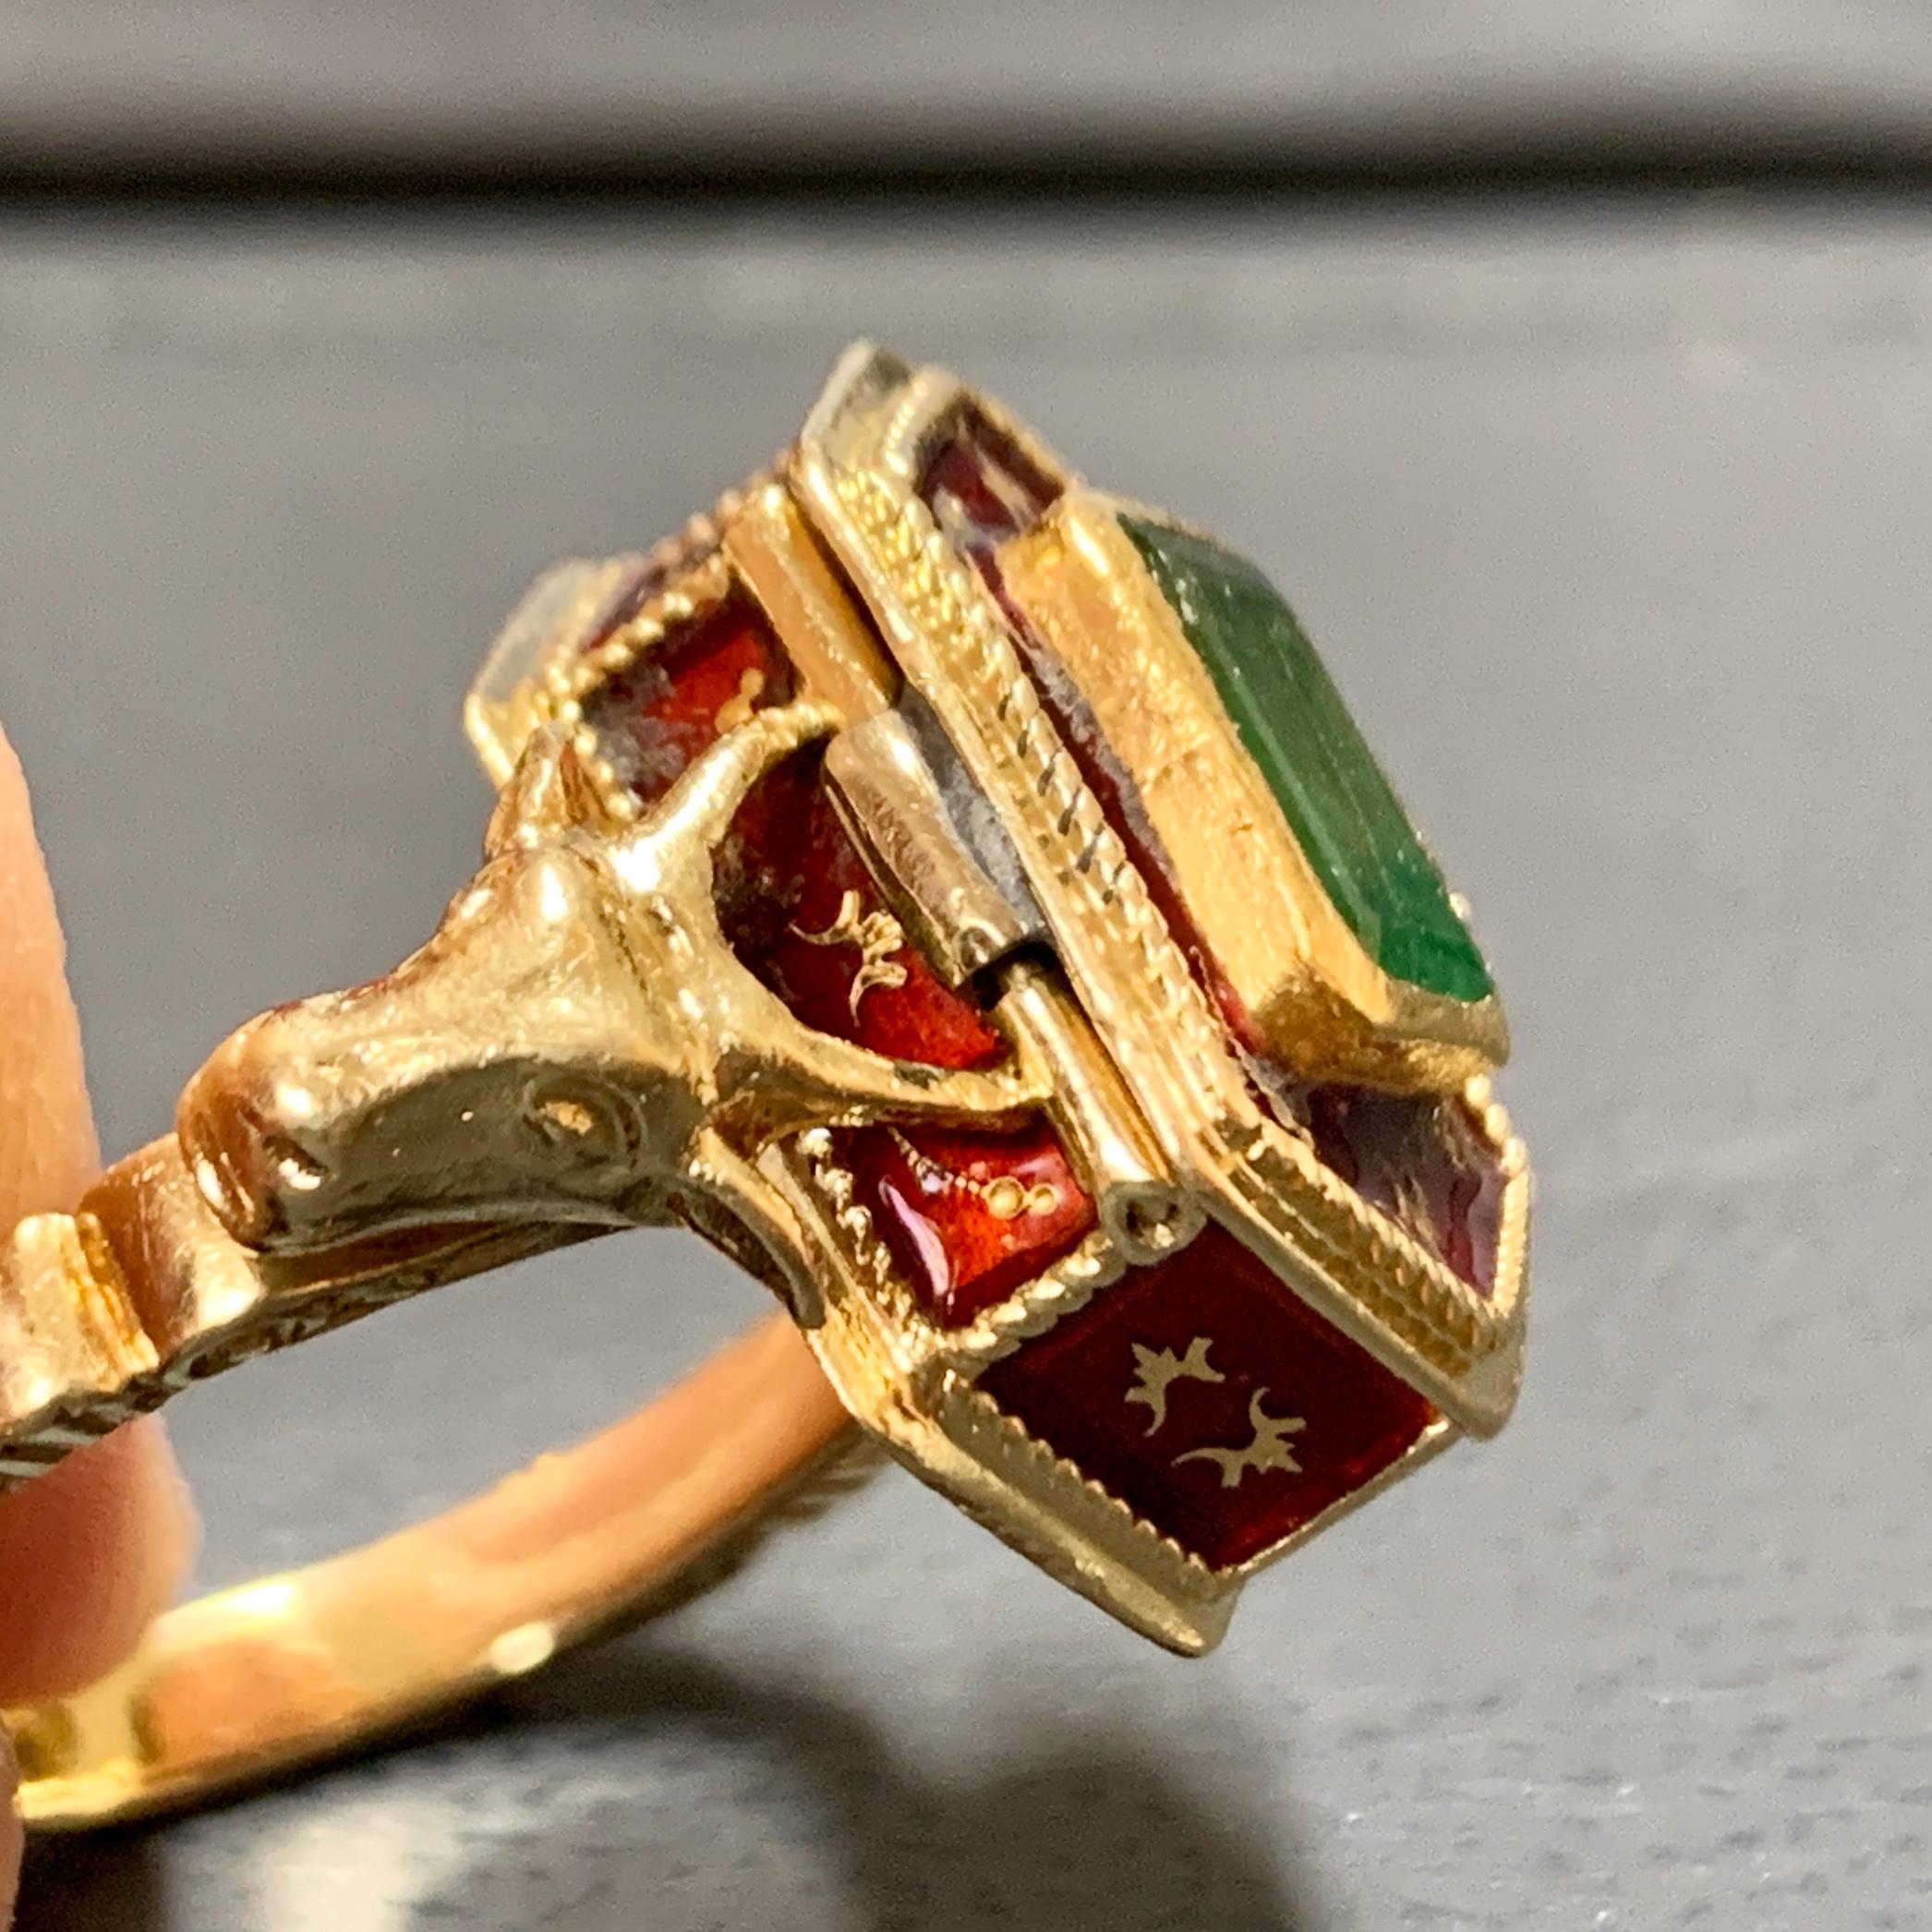 Antique Victorian 18 Karat Gold, Emerald and Enamel Snuff, Poison, locket Ring.

Extremely rare lover piece.

Age-related condition.

Hallmarked.
Inner diameter: 19mm.
US Ring Size: 9.1 (9)